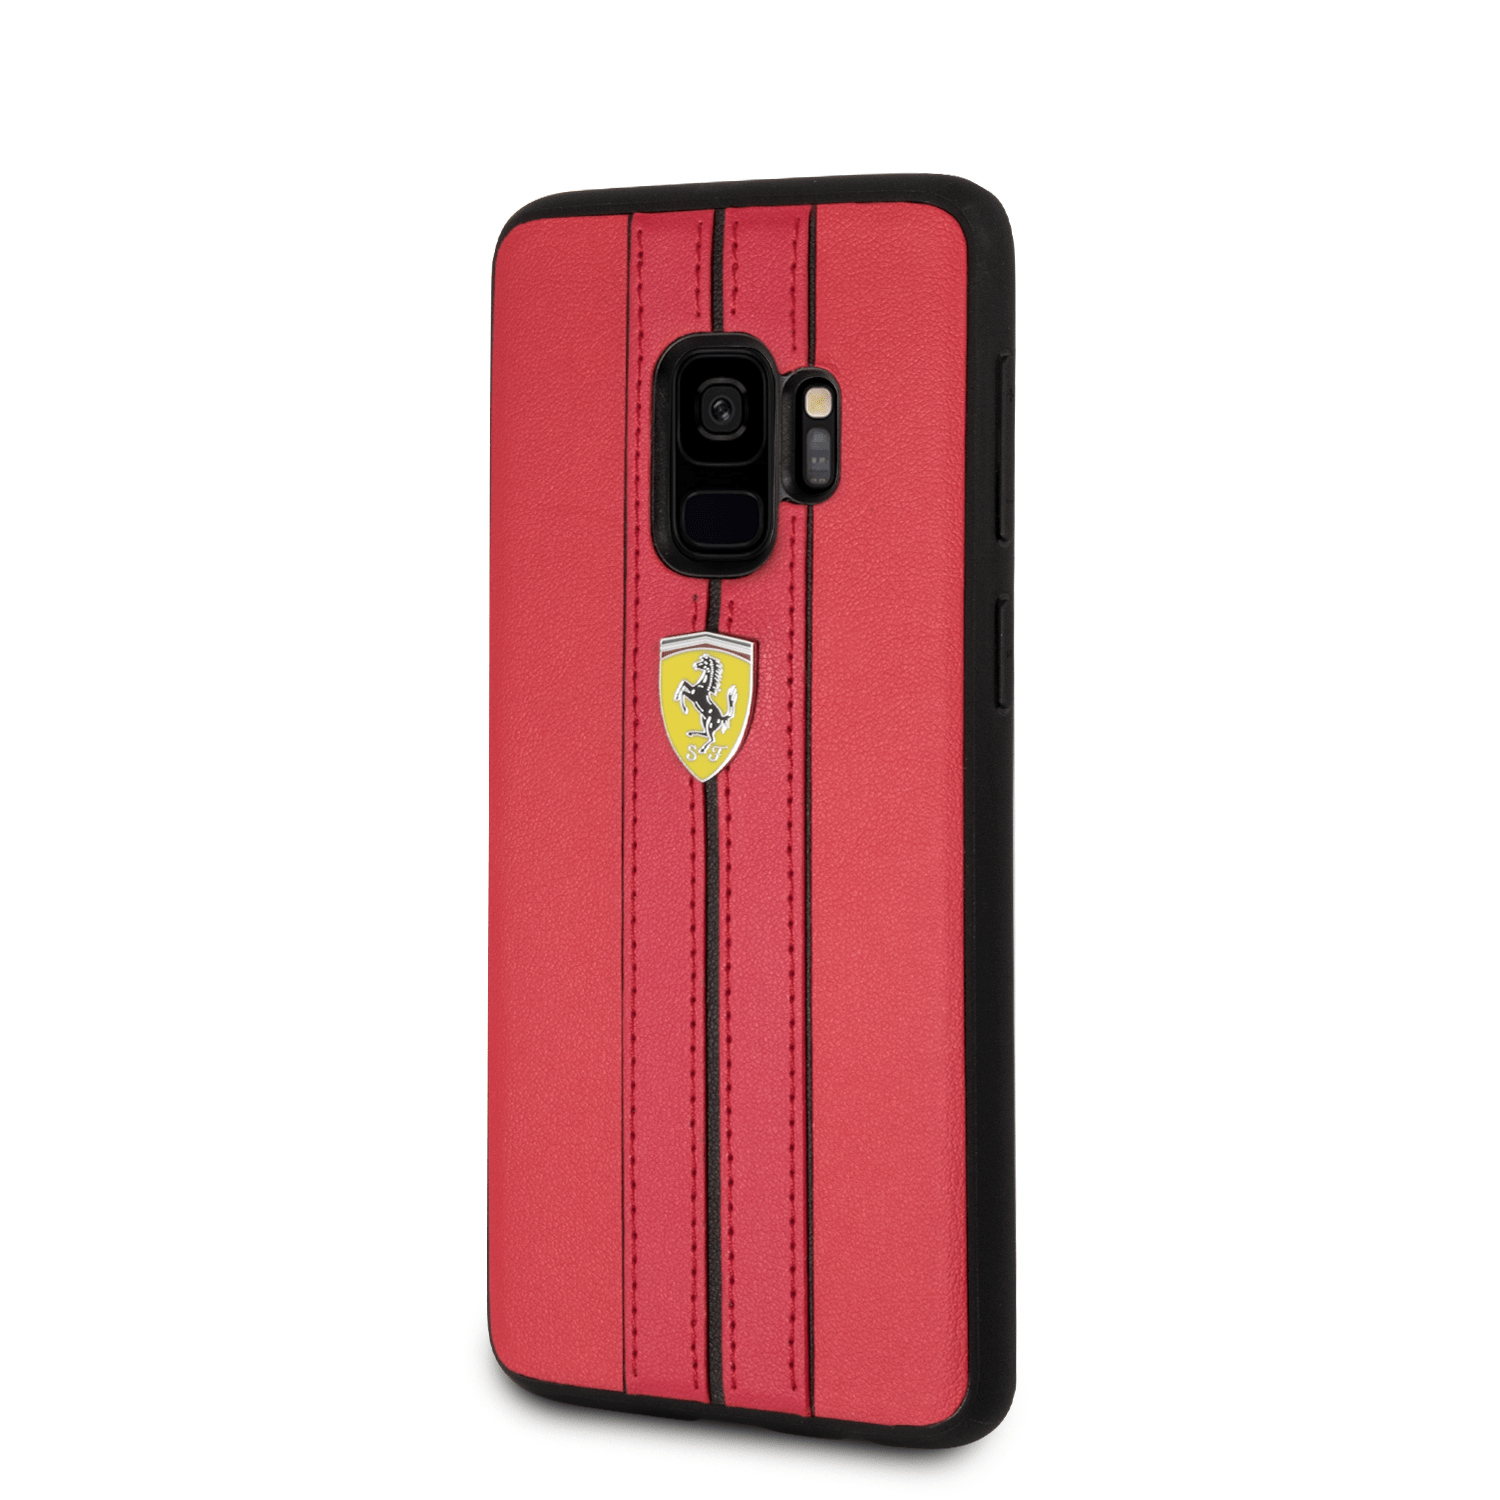 This smooth PU leather Ferrari device/phone case features contrast piping and the Ferrari logo, creating a sculpted 3D effect